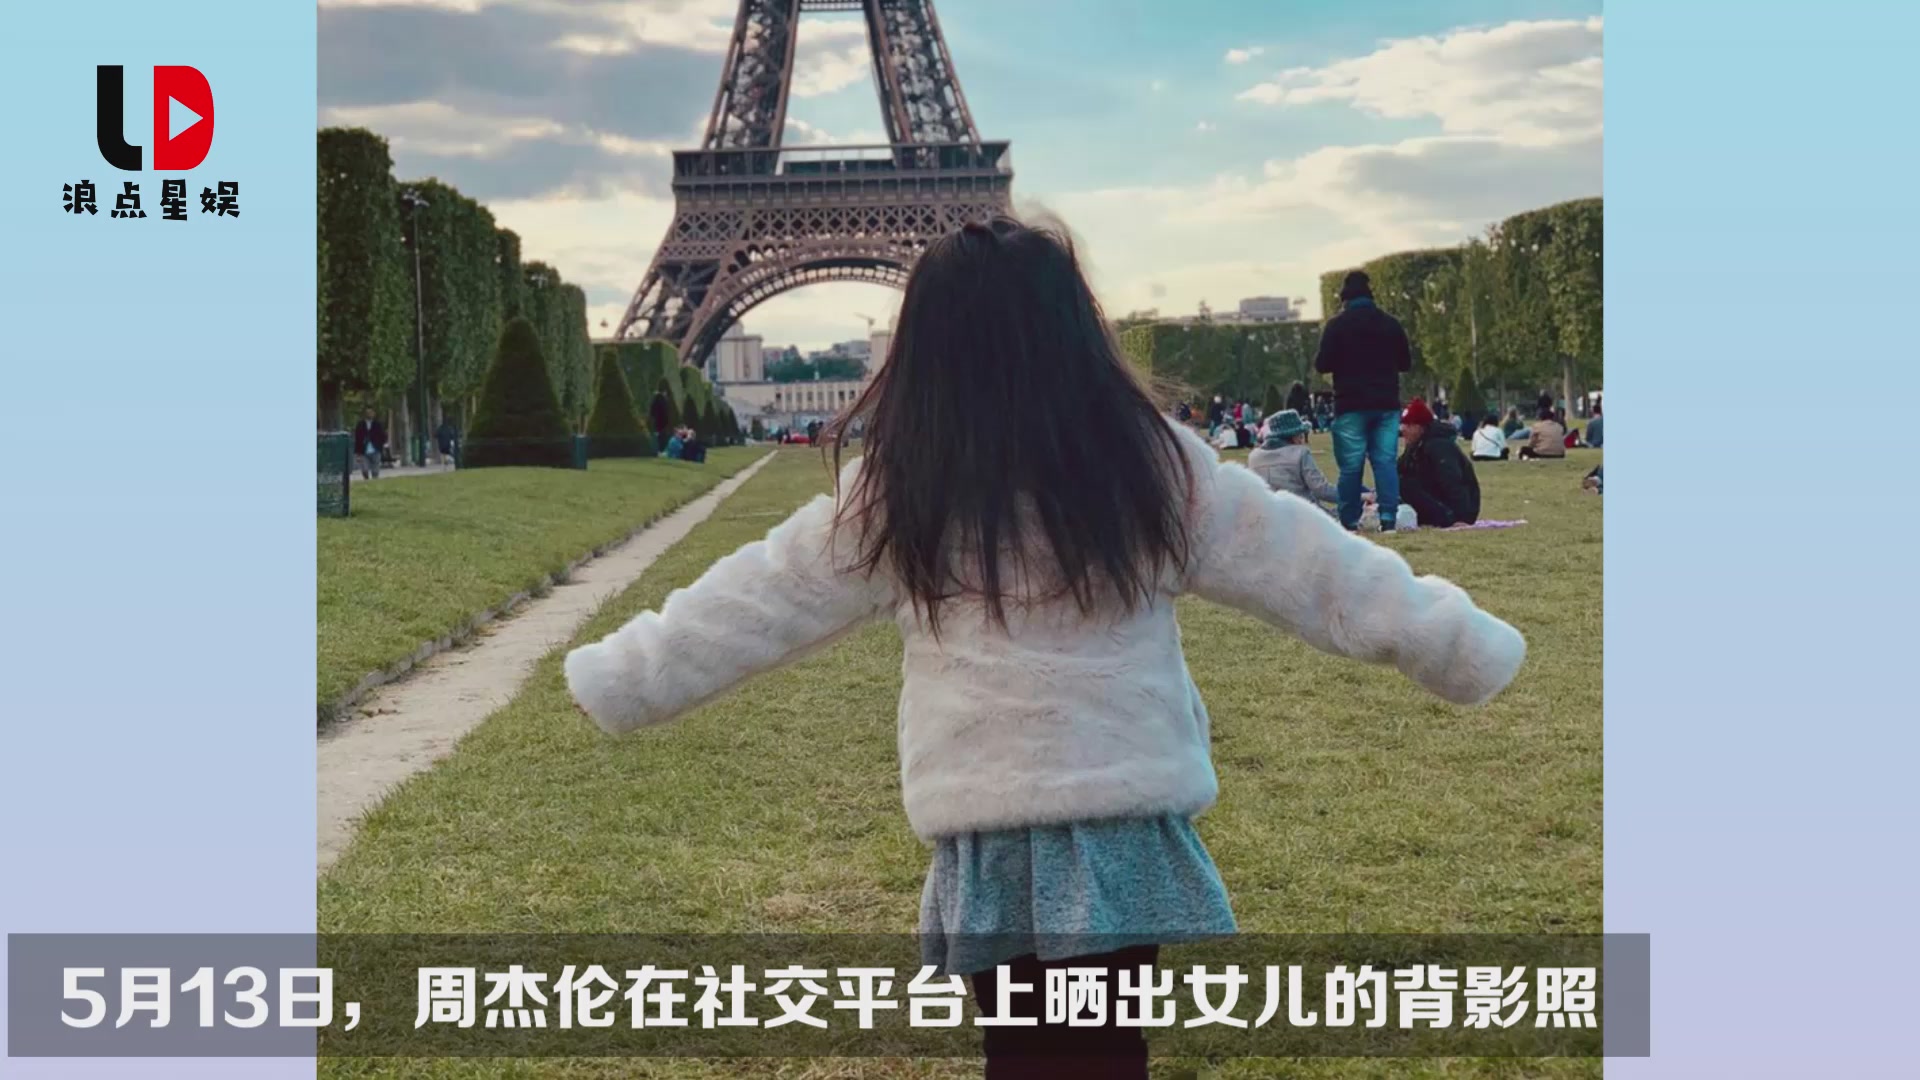 Jay Chou basks in her daughter's back. The background of the Eiffel Tower is speculated to be related to the new album.